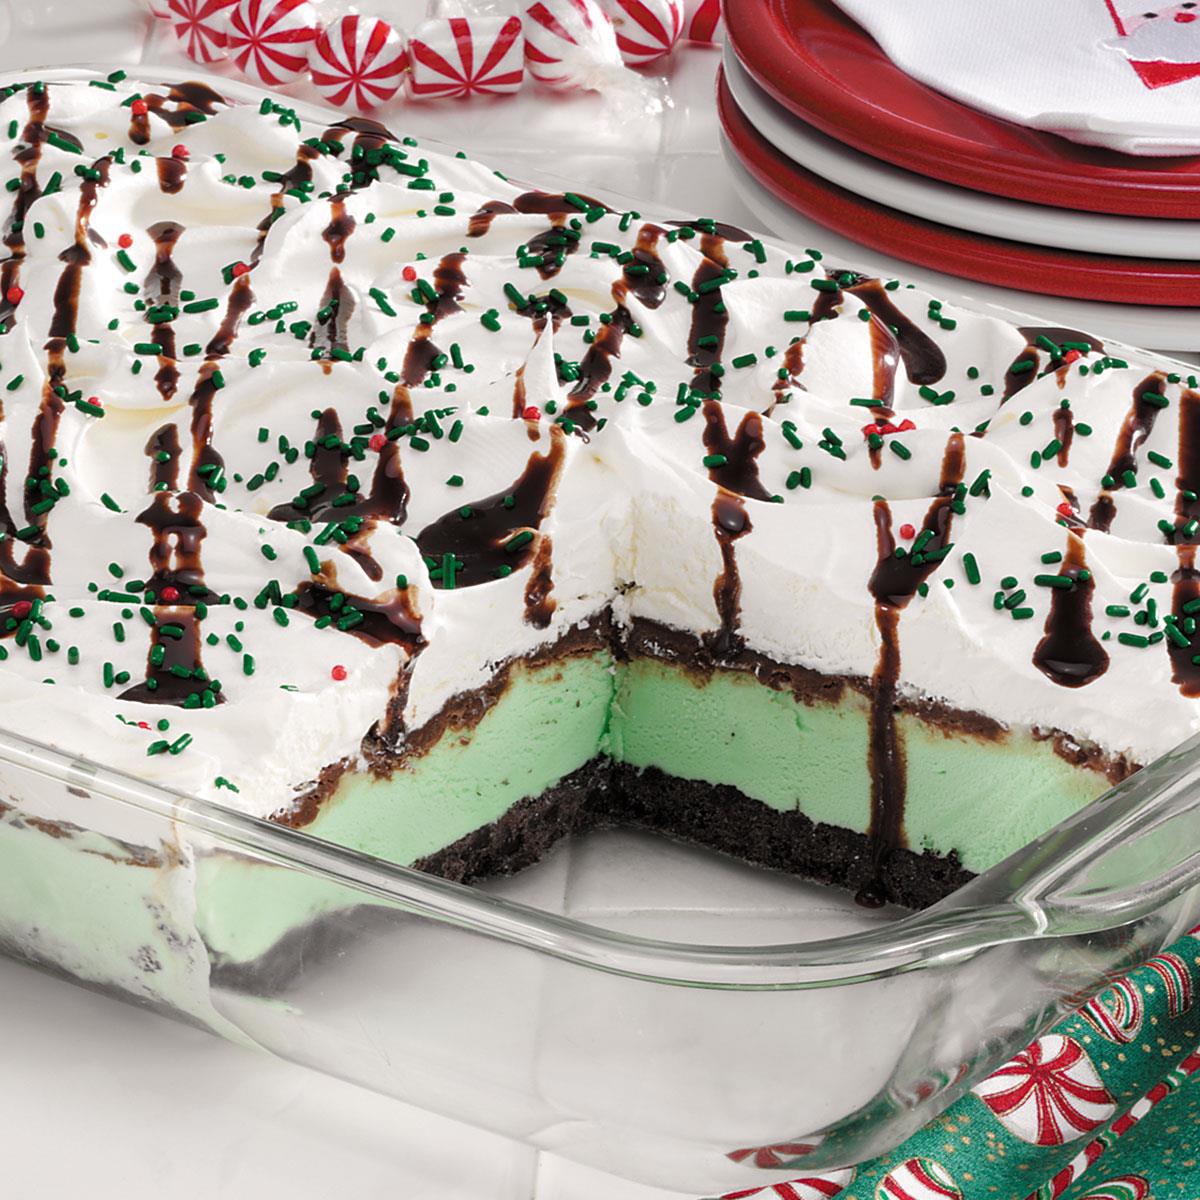 Christmas Dessert Recipes / Best Holiday And Christmas Dessert Recipes ...